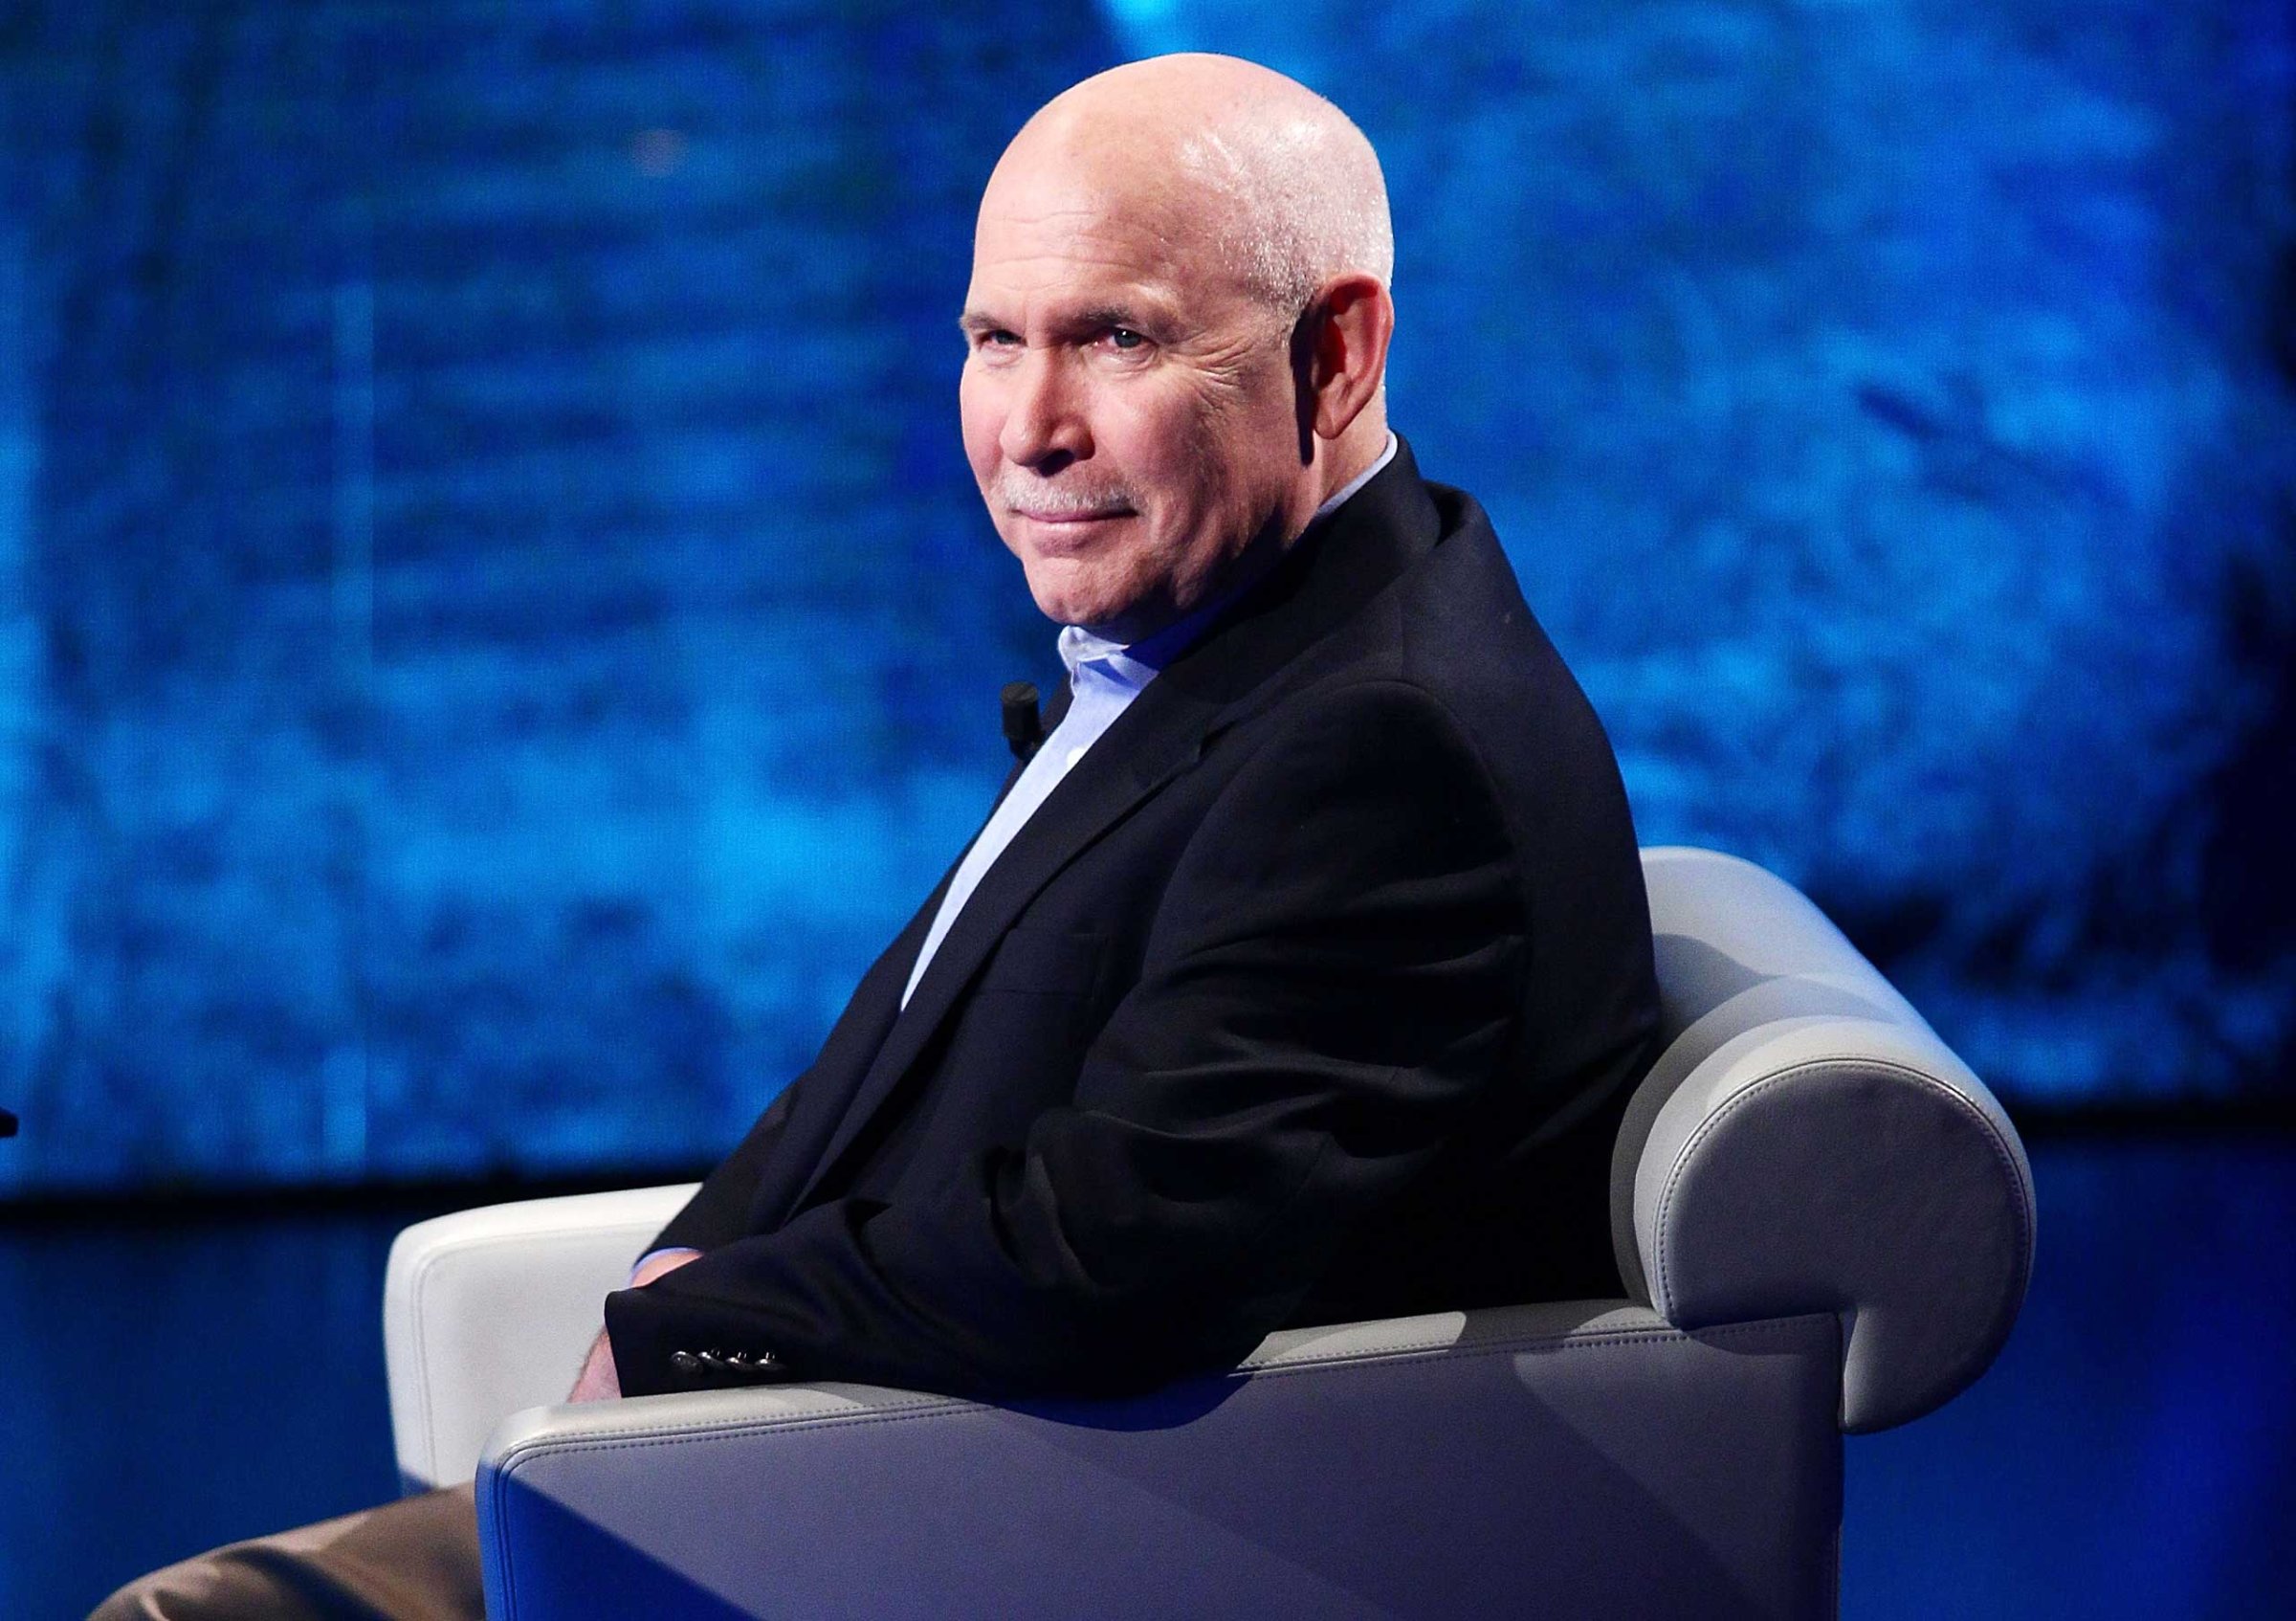 Photographer Steve McCurry attends a TV Show on November 2, 2013 in Milan, Italy.